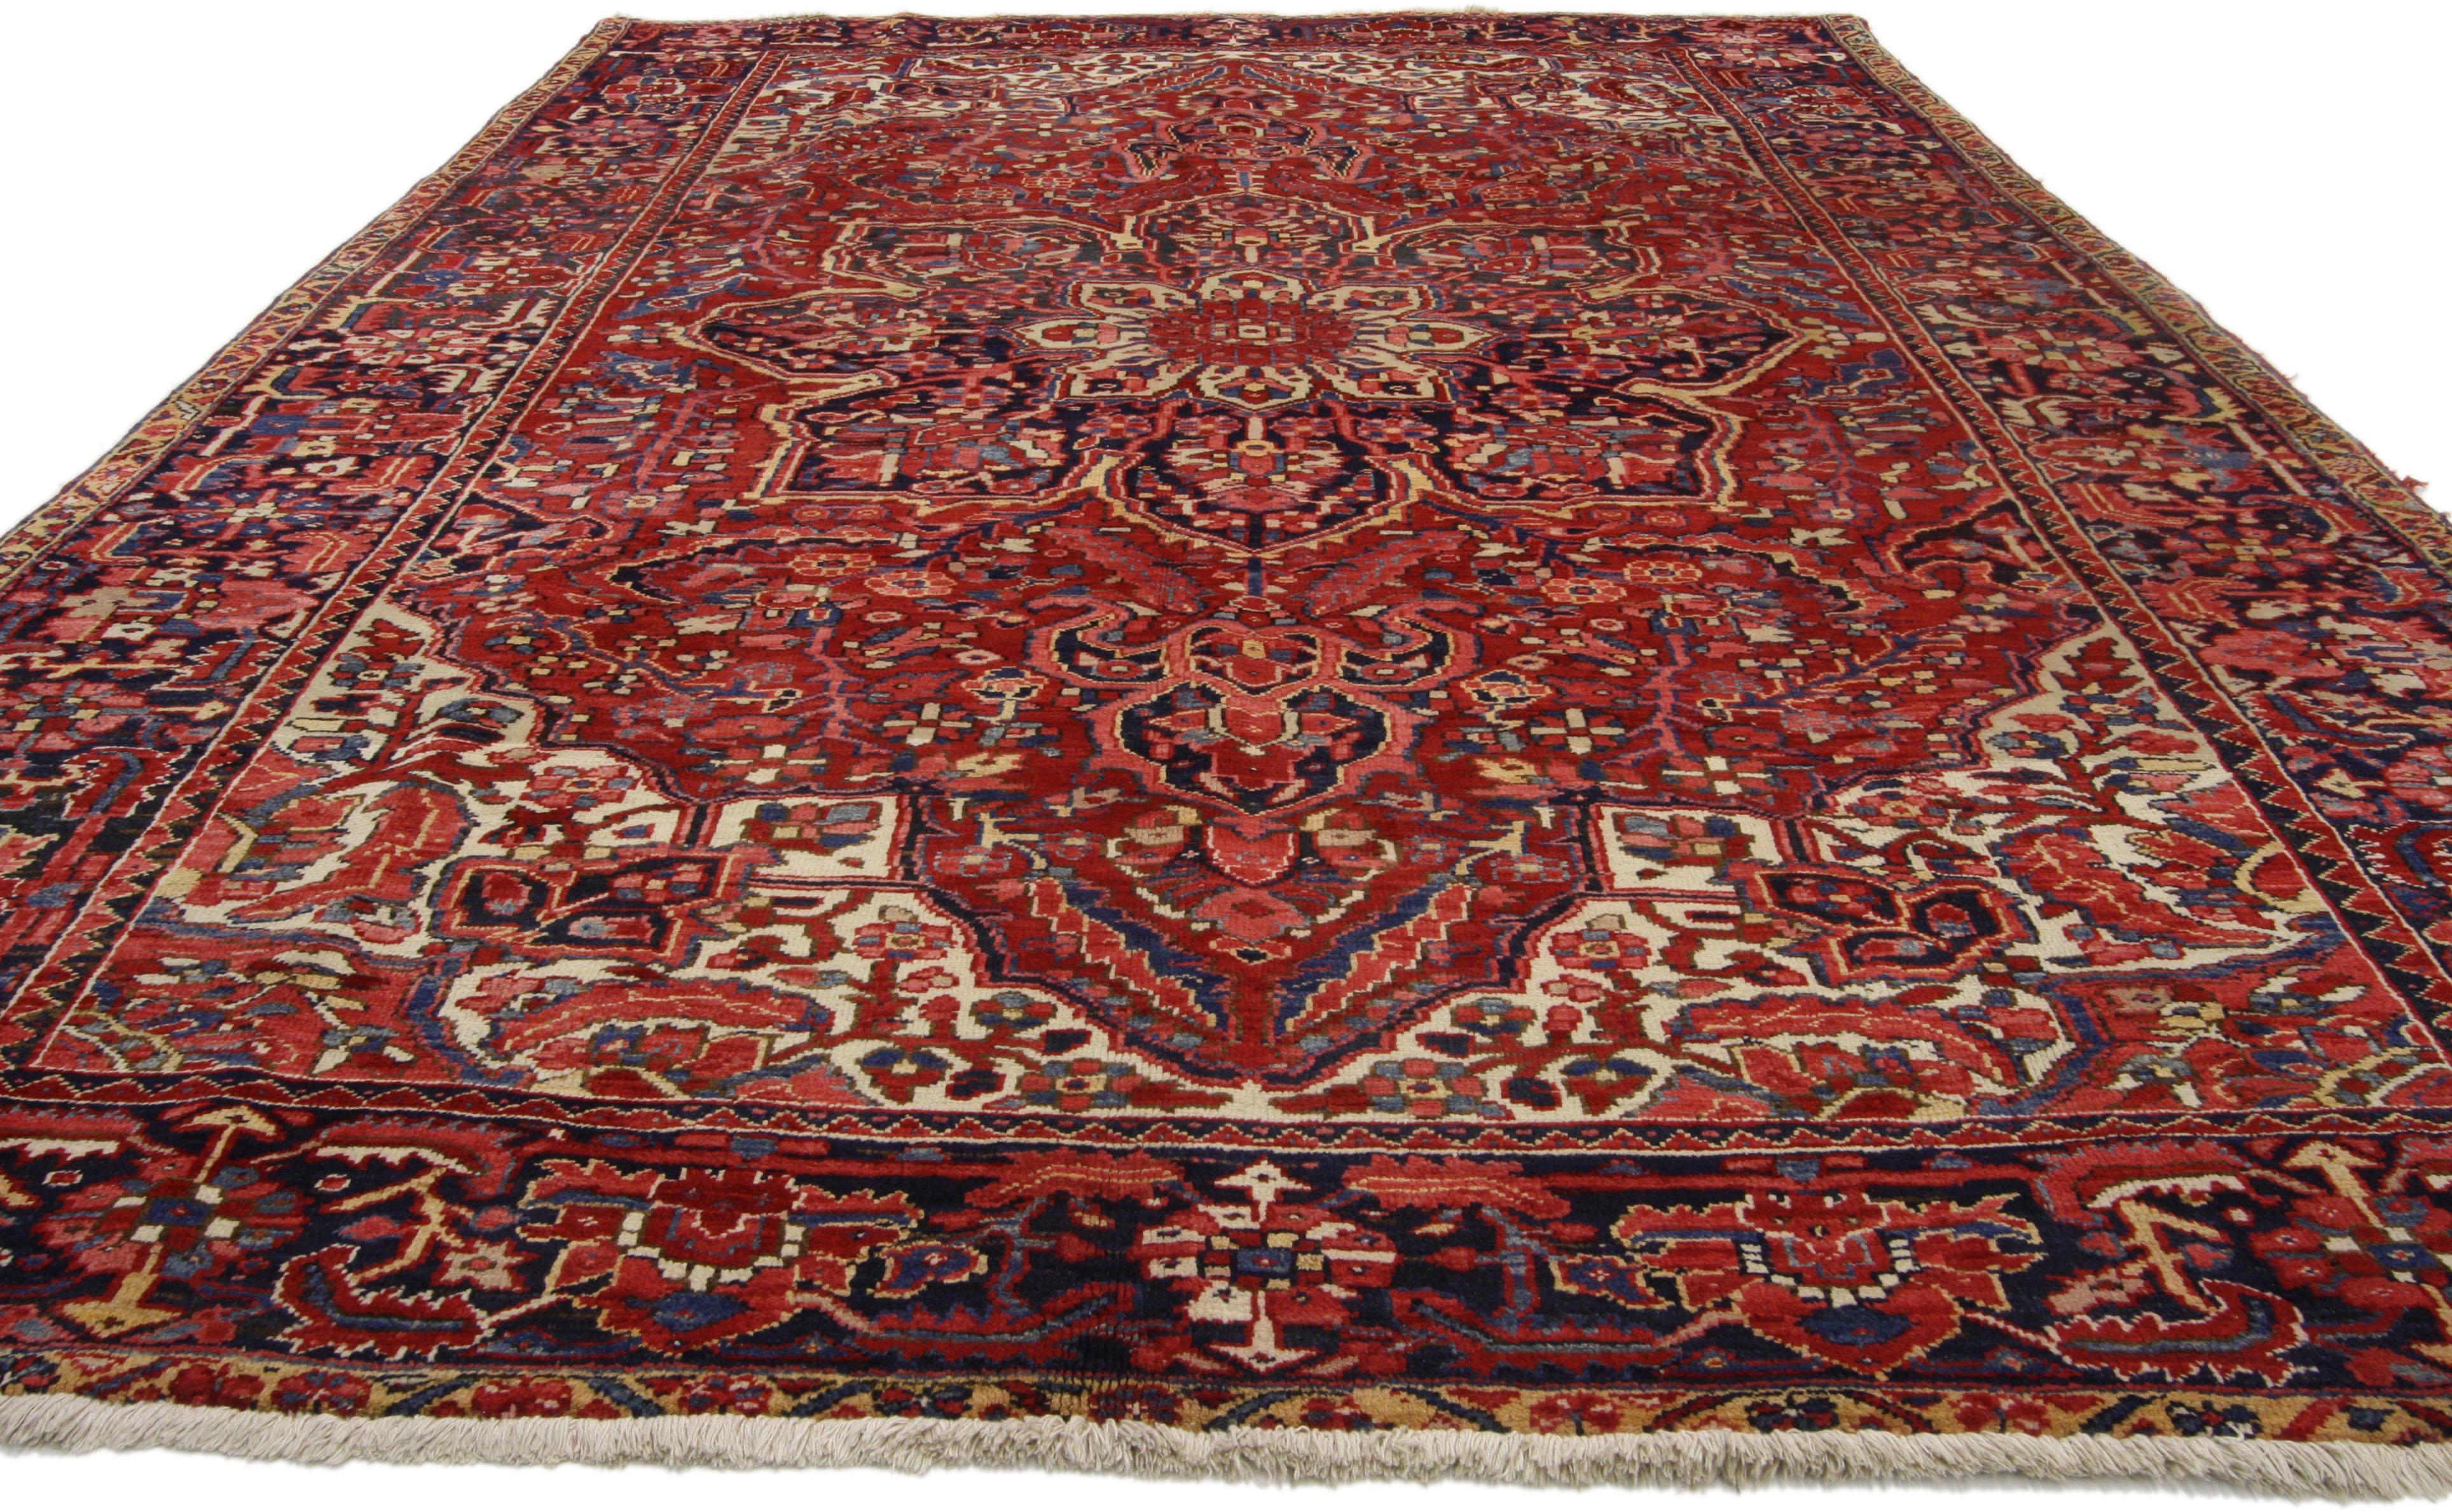 76187 Mid-Century Modern Vintage Heriz Area Rug with Luxe Style. Full of character and stately presence, this vintage Persian Heriz rug features classical elements of Persian rug design and Mid-Century Modern style. This vintage Persian rug has many